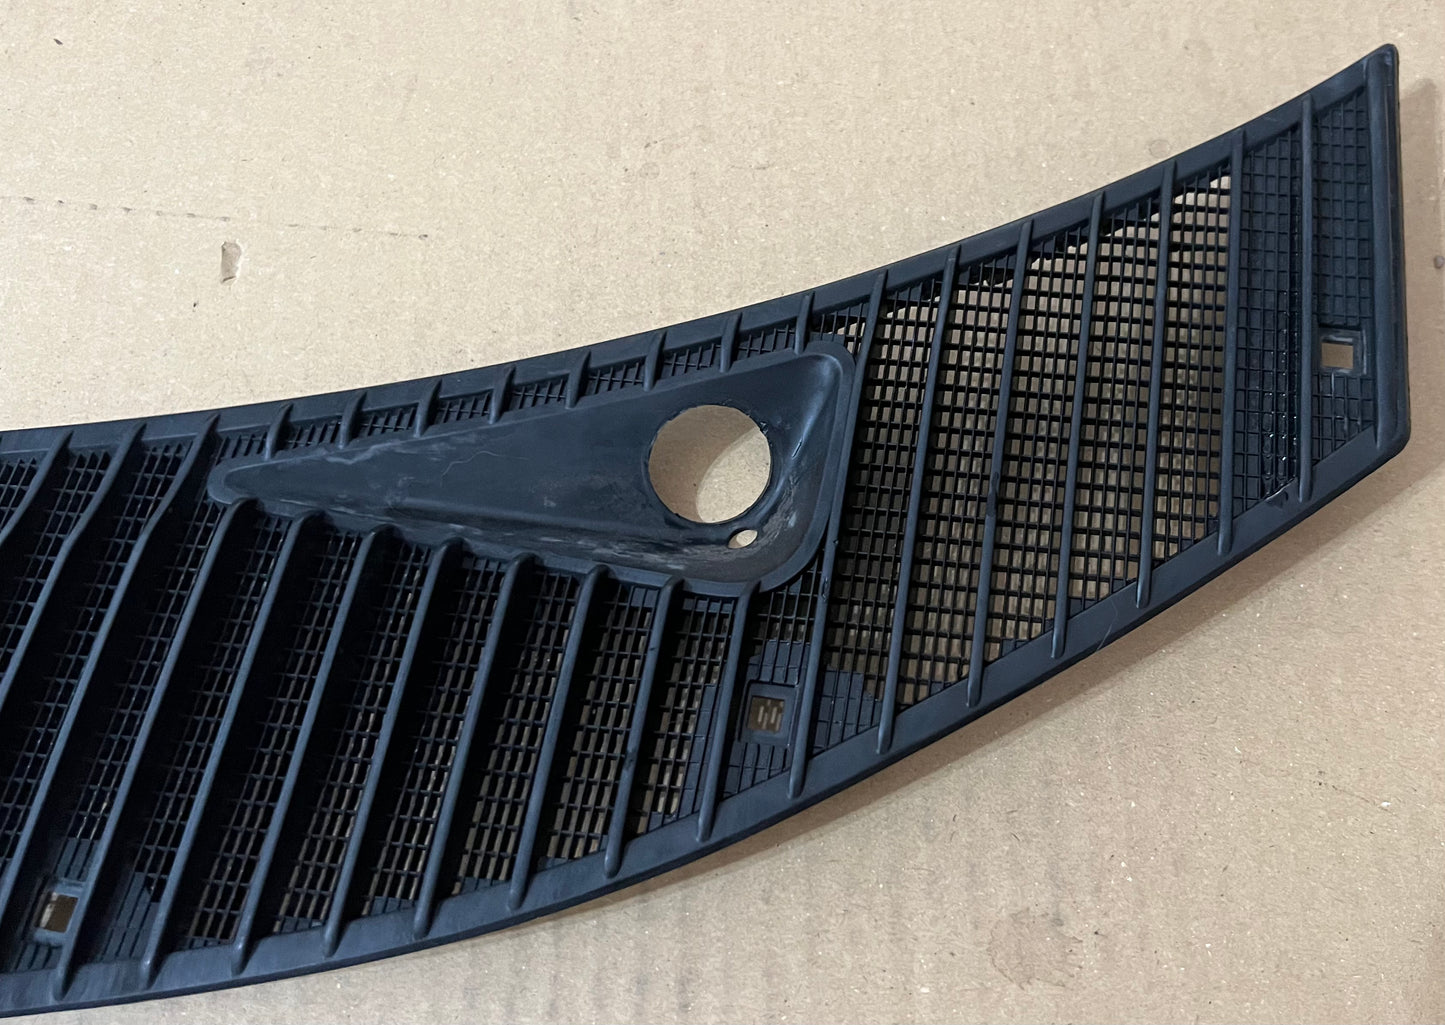 Used Mercedes-Benz Cowl Wiper Vent Cover W123